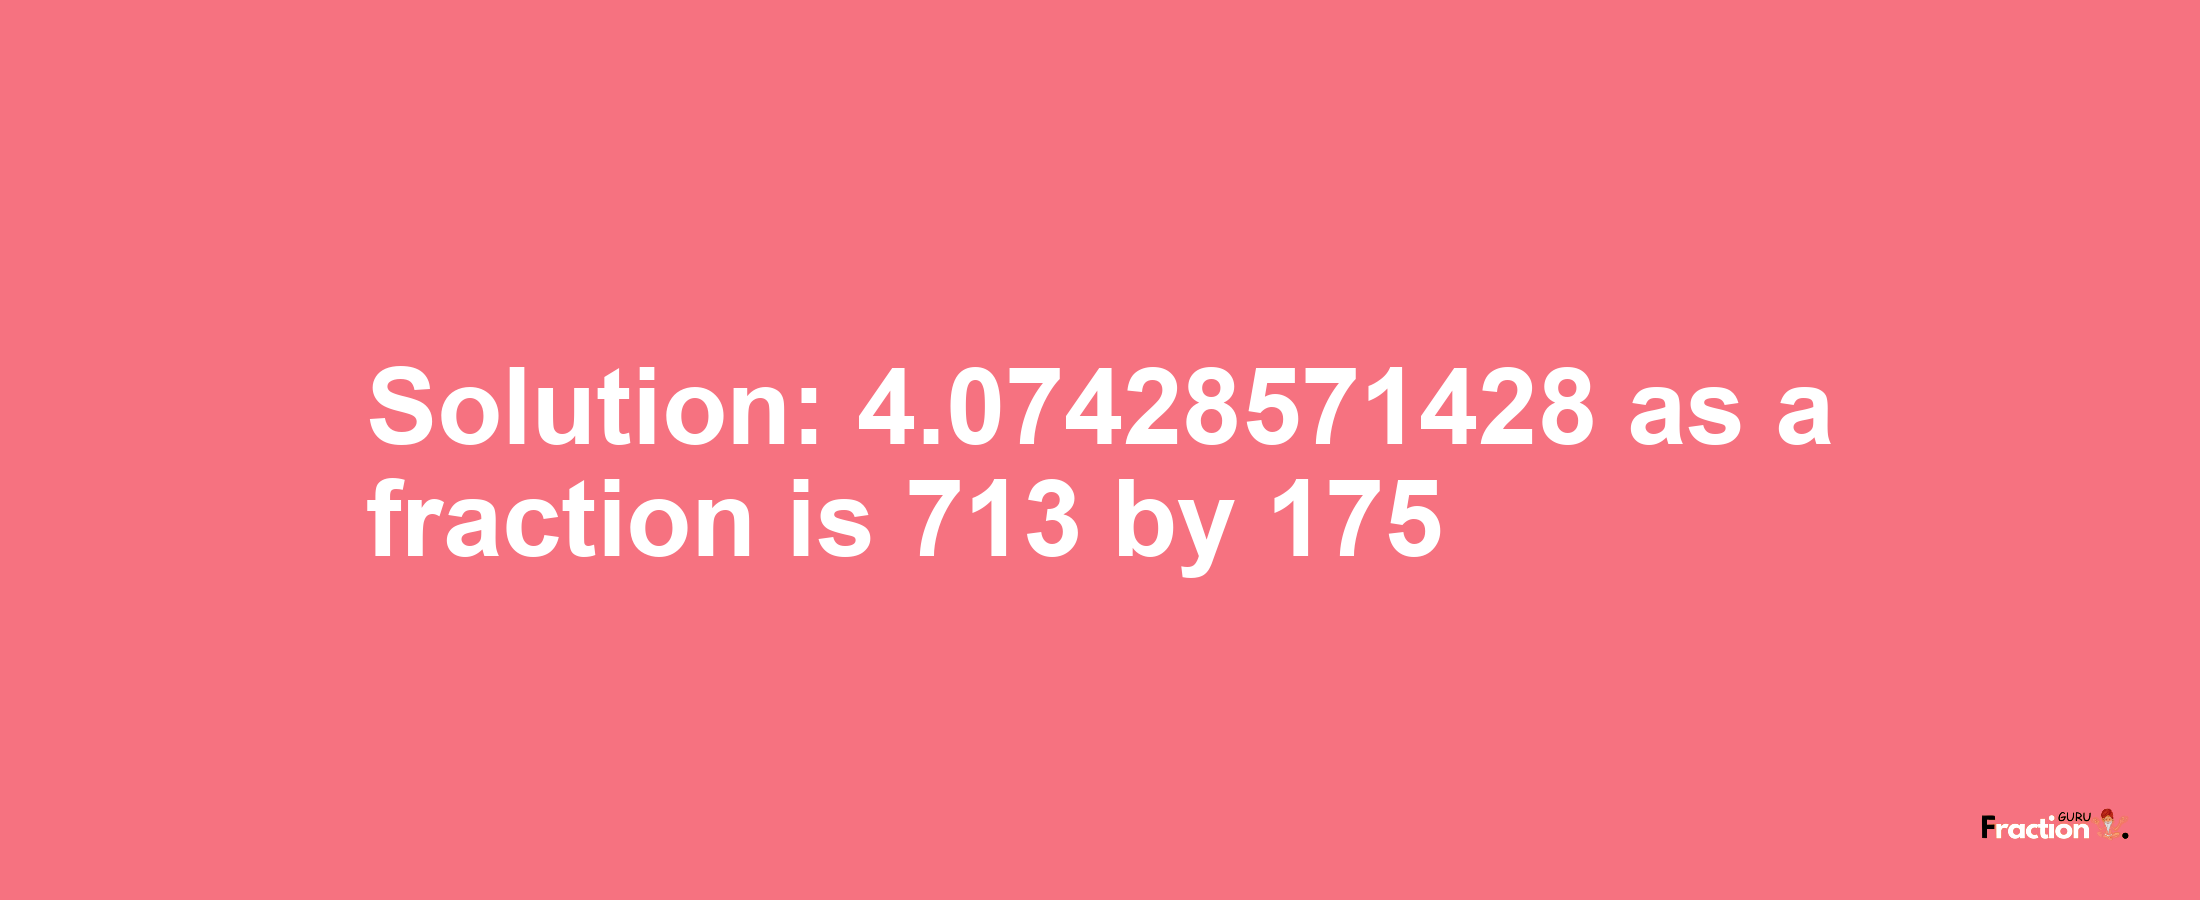 Solution:4.07428571428 as a fraction is 713/175